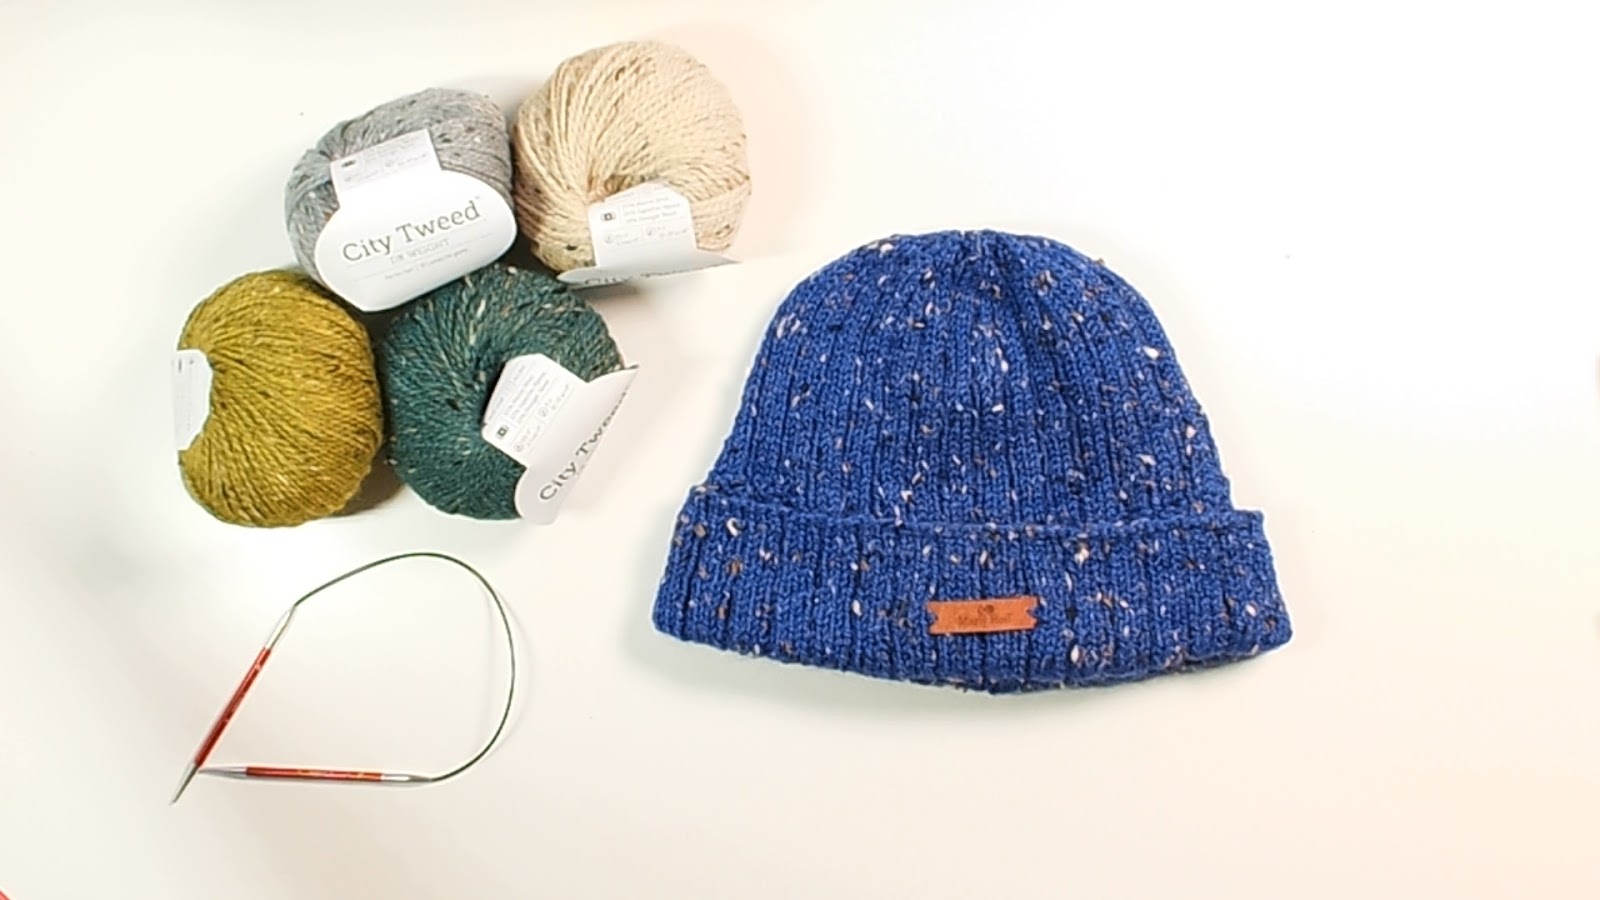 On a table are four balls of the City Tweed DK Yarn in different colors, a pair of 16 inch size 7/4.5mm knitting needles, and the Every Day Knit Hat laying flat with the brim folded up - Marly Bird